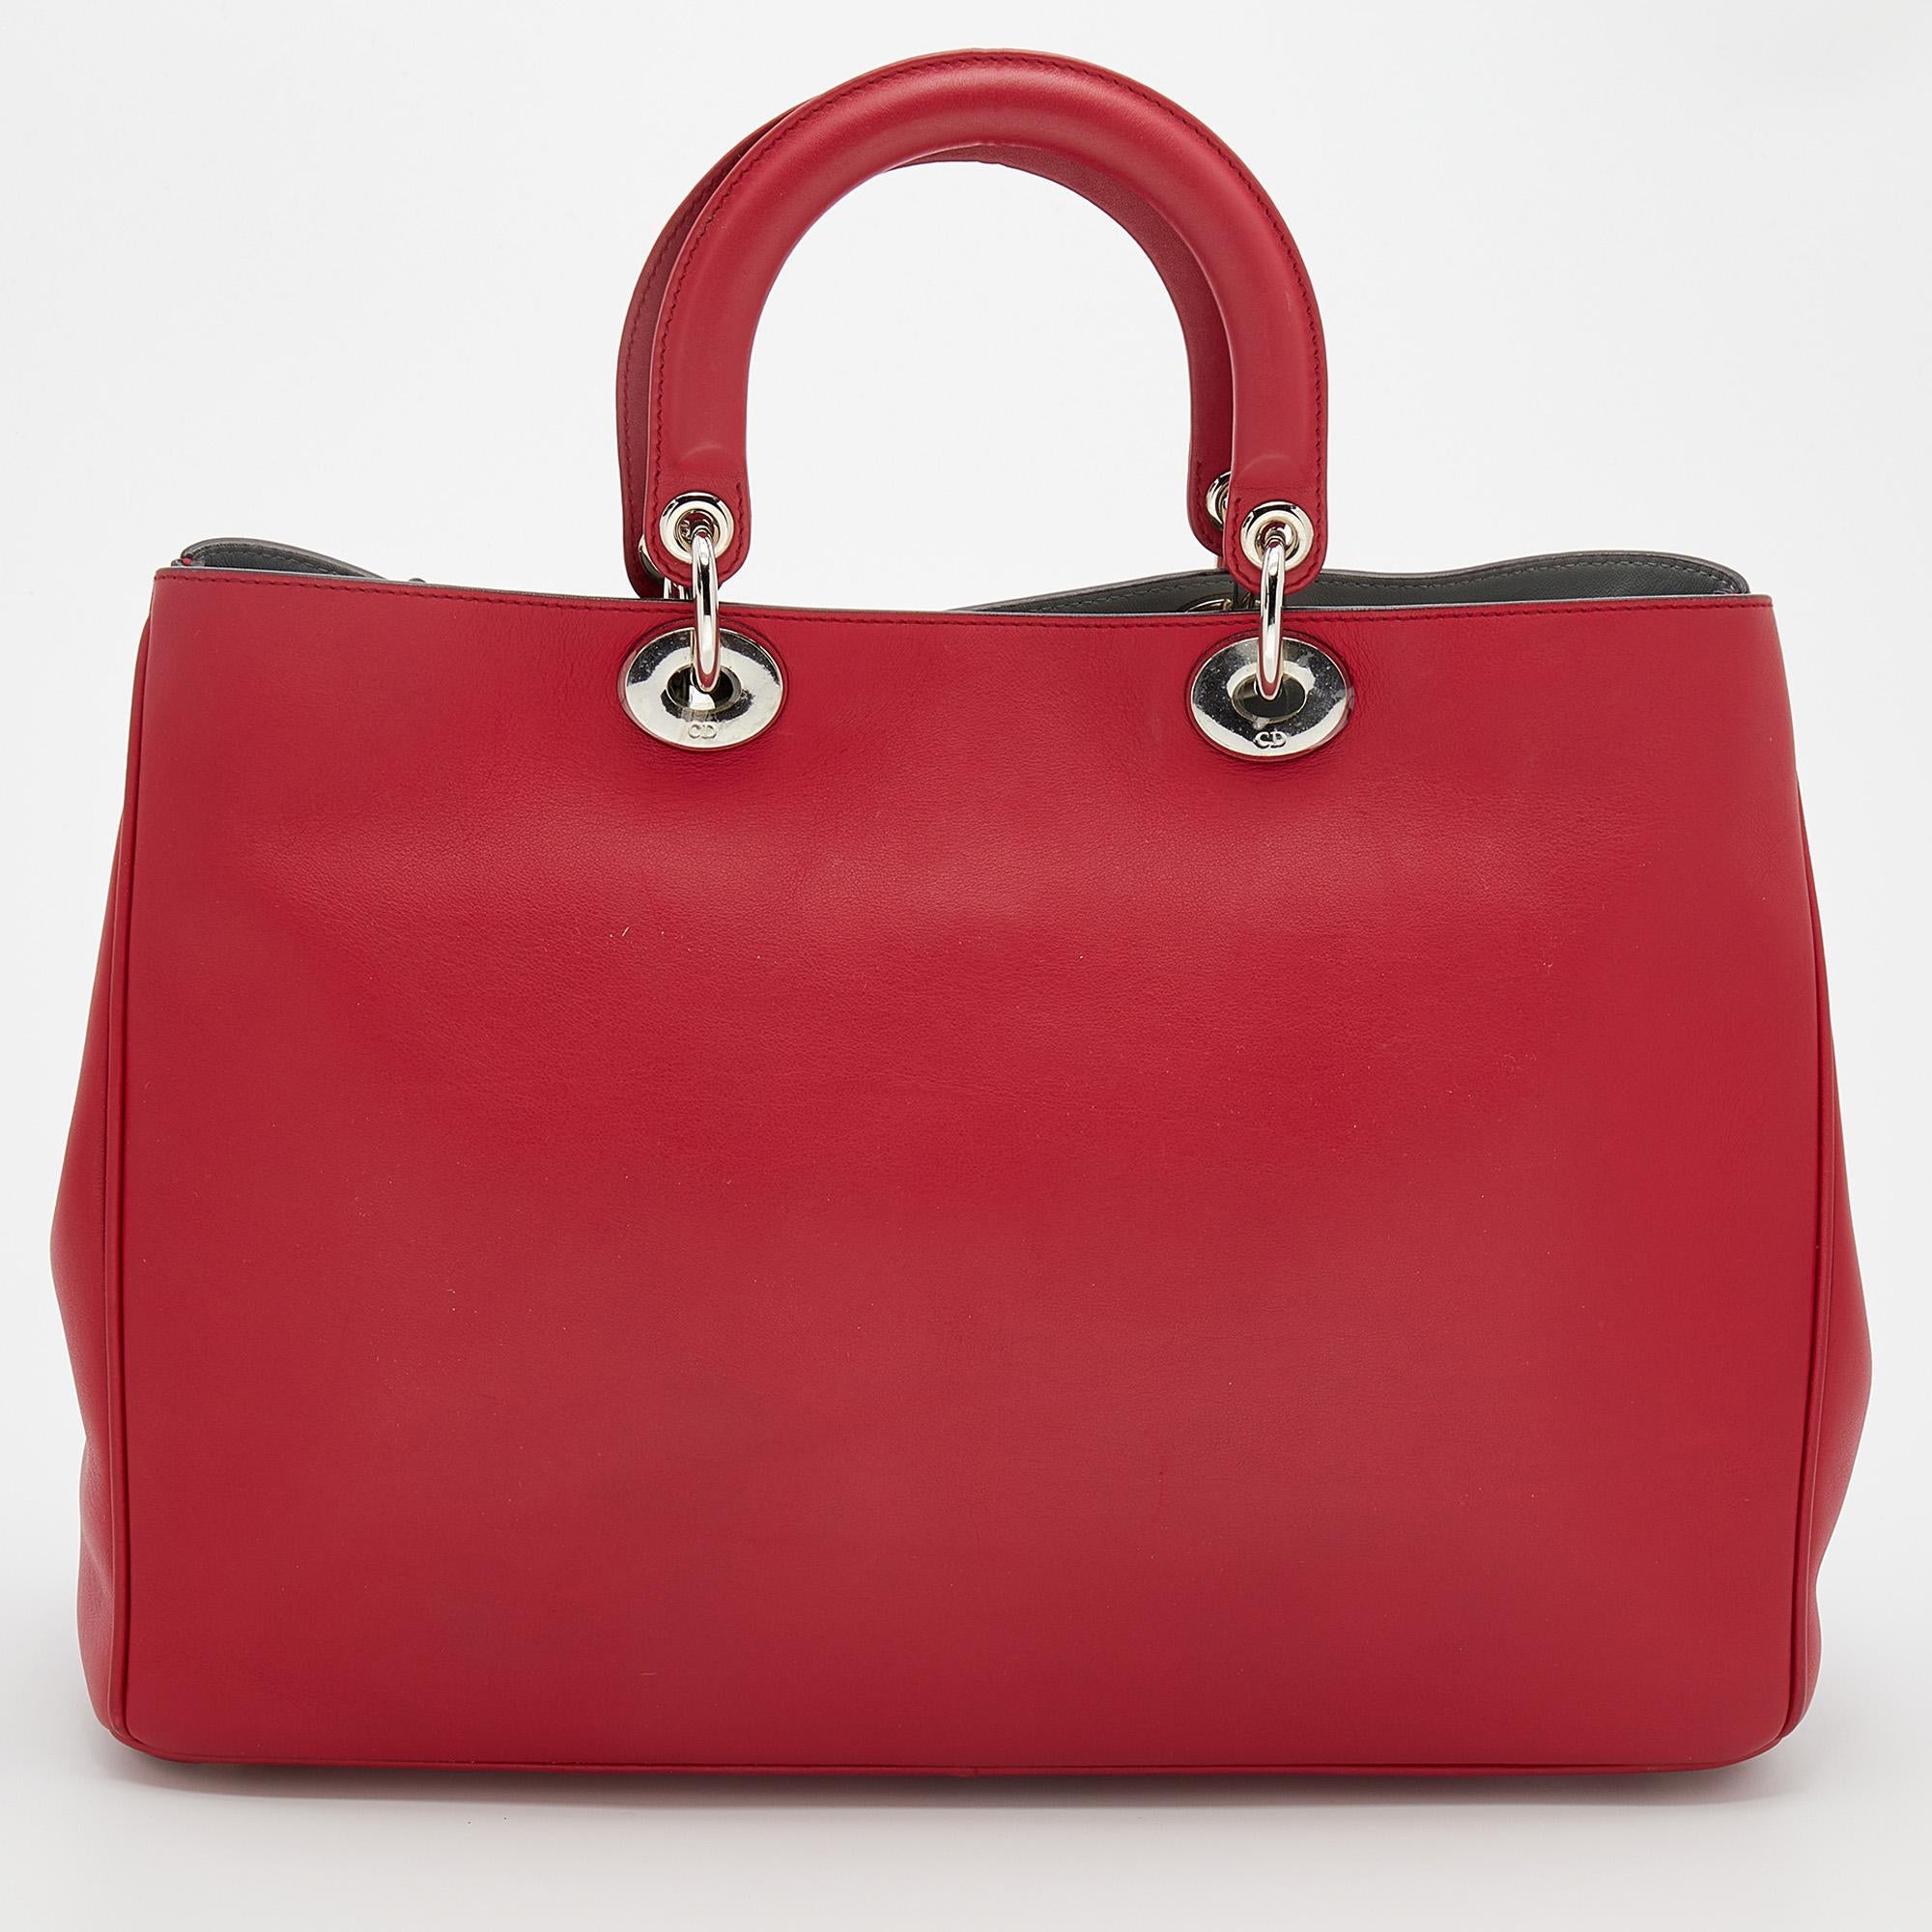 The Diorissimo perfectly captures the refined craftsmanship and the brand's vision of timeless elegance. The spacious interior makes this Dior tote a highly functional accessory. Created from red leather, it is complemented with dual handles, a